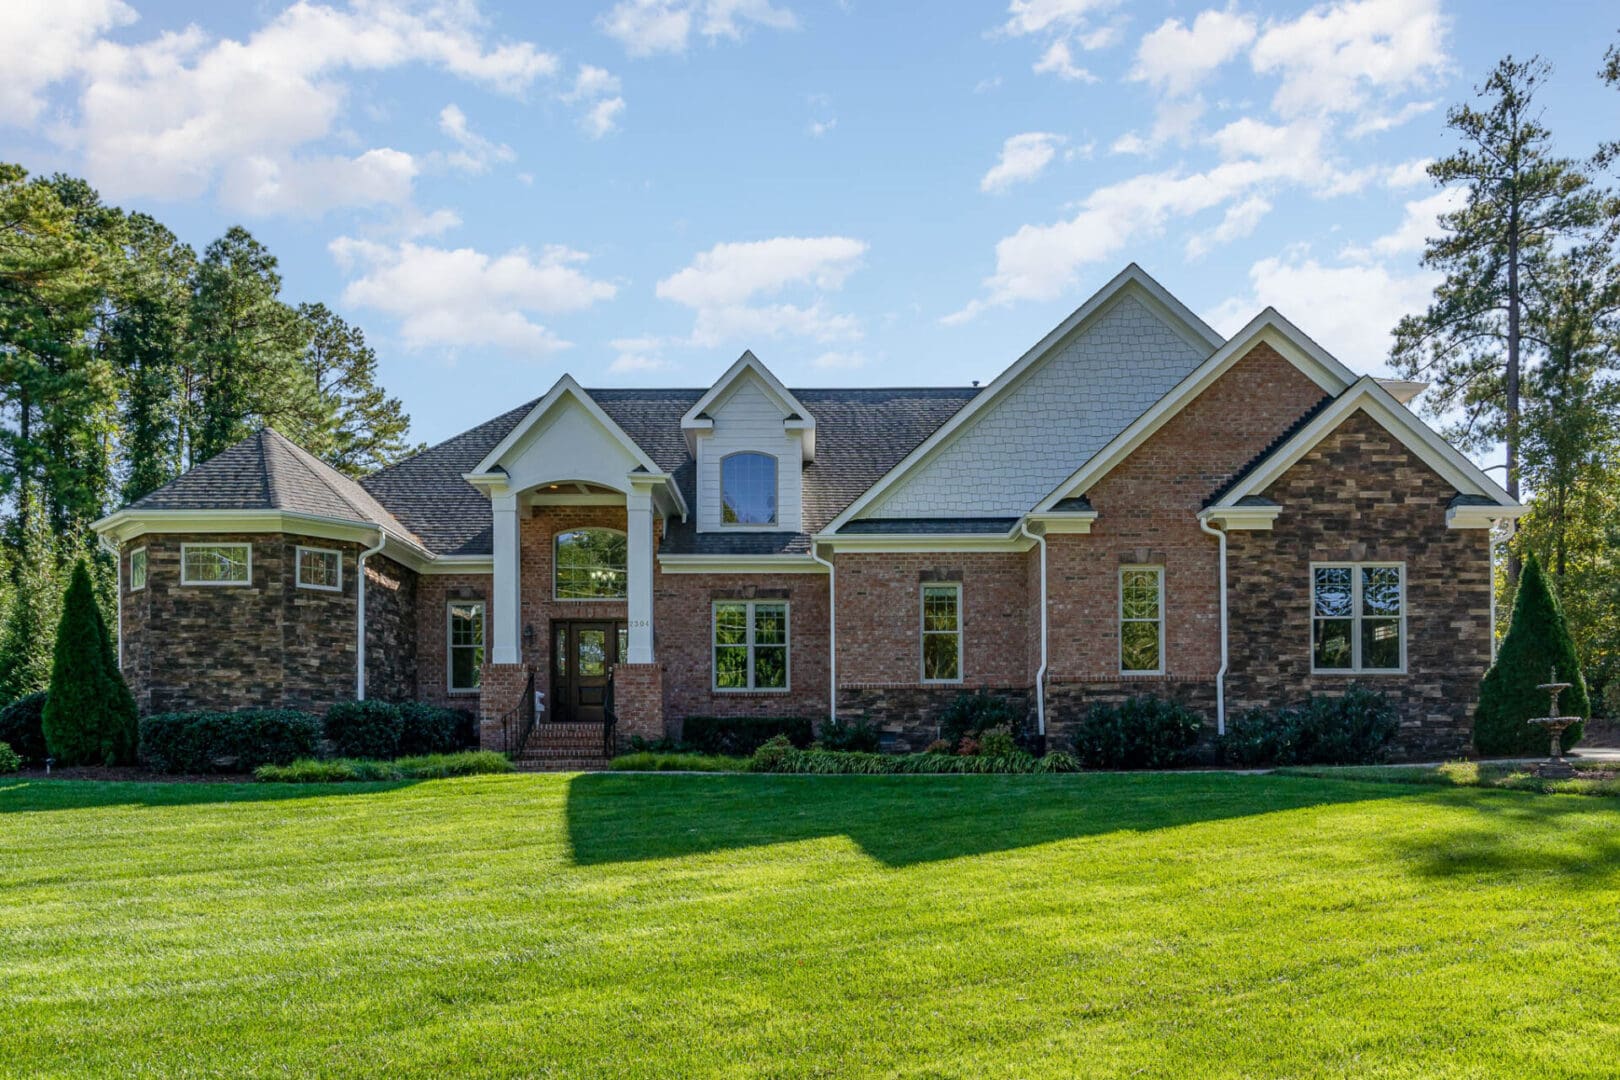 A large brick house with green grass in front of it.